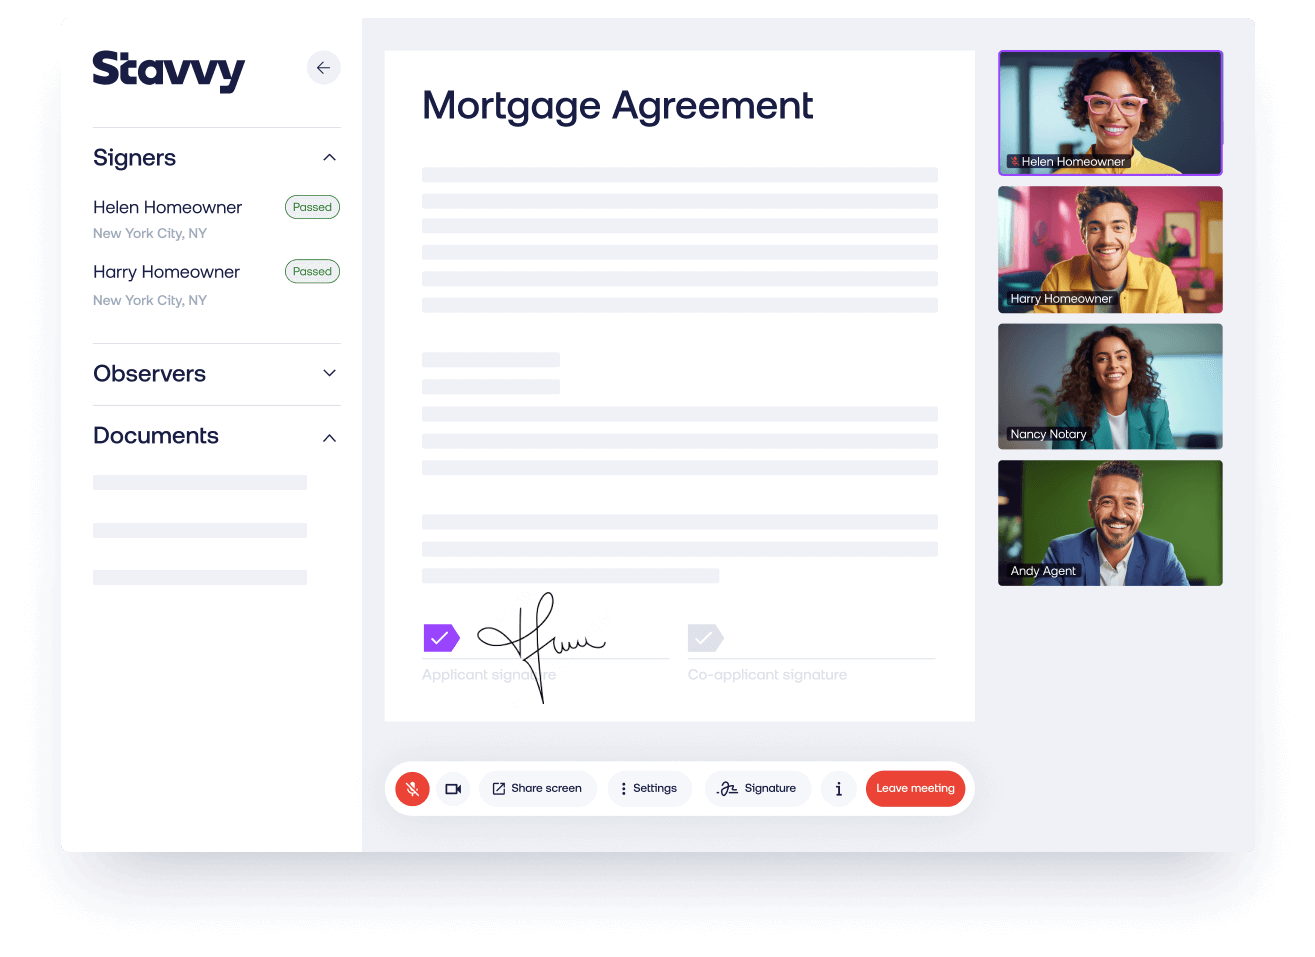 Illustration of a RON mortgage transaction on the Stavvy platform